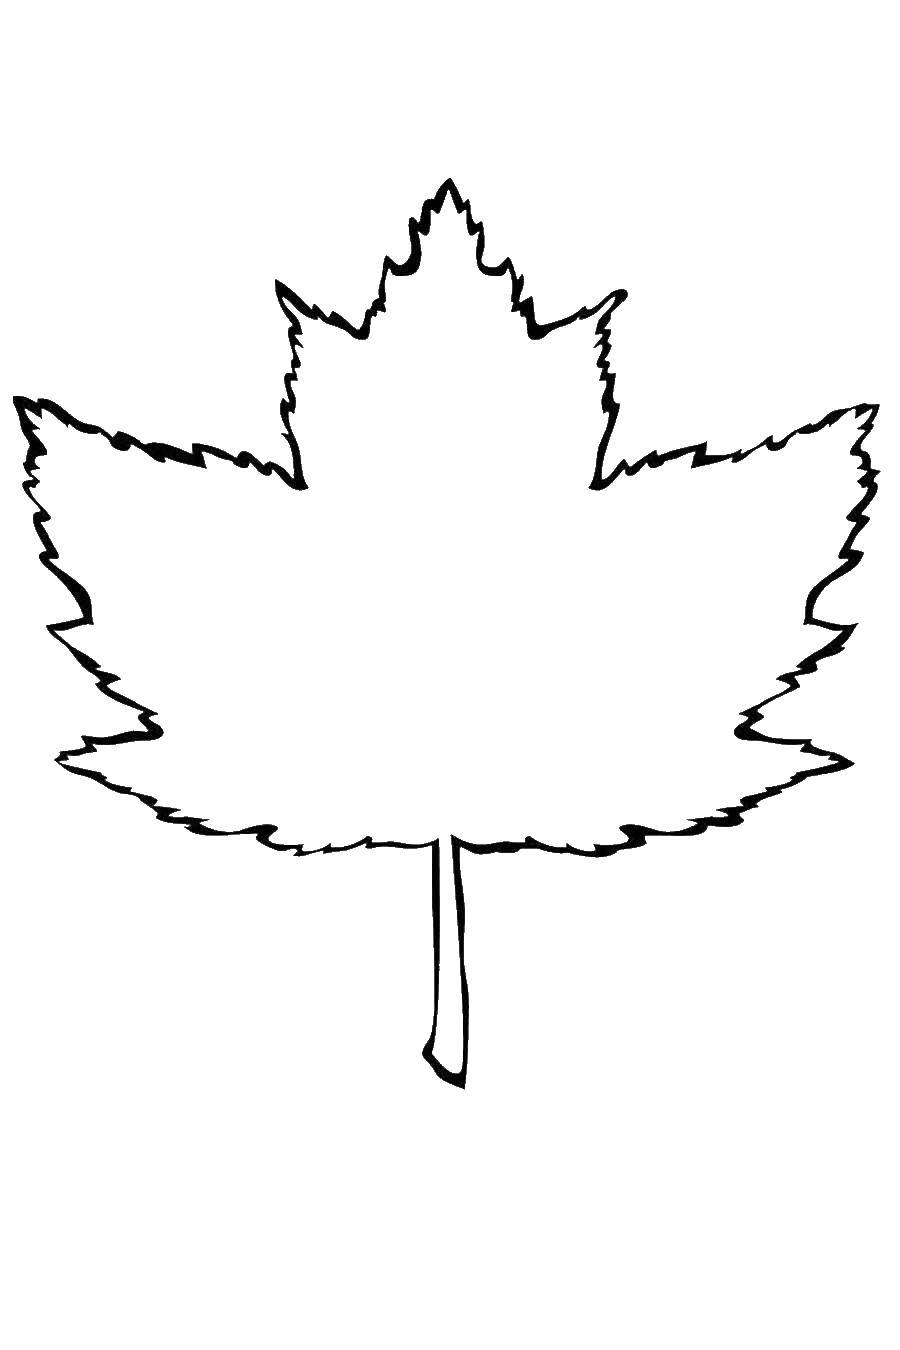 Coloring The outline of the leaf. Category The contours of the leaves. Tags:  Trees, leaf.